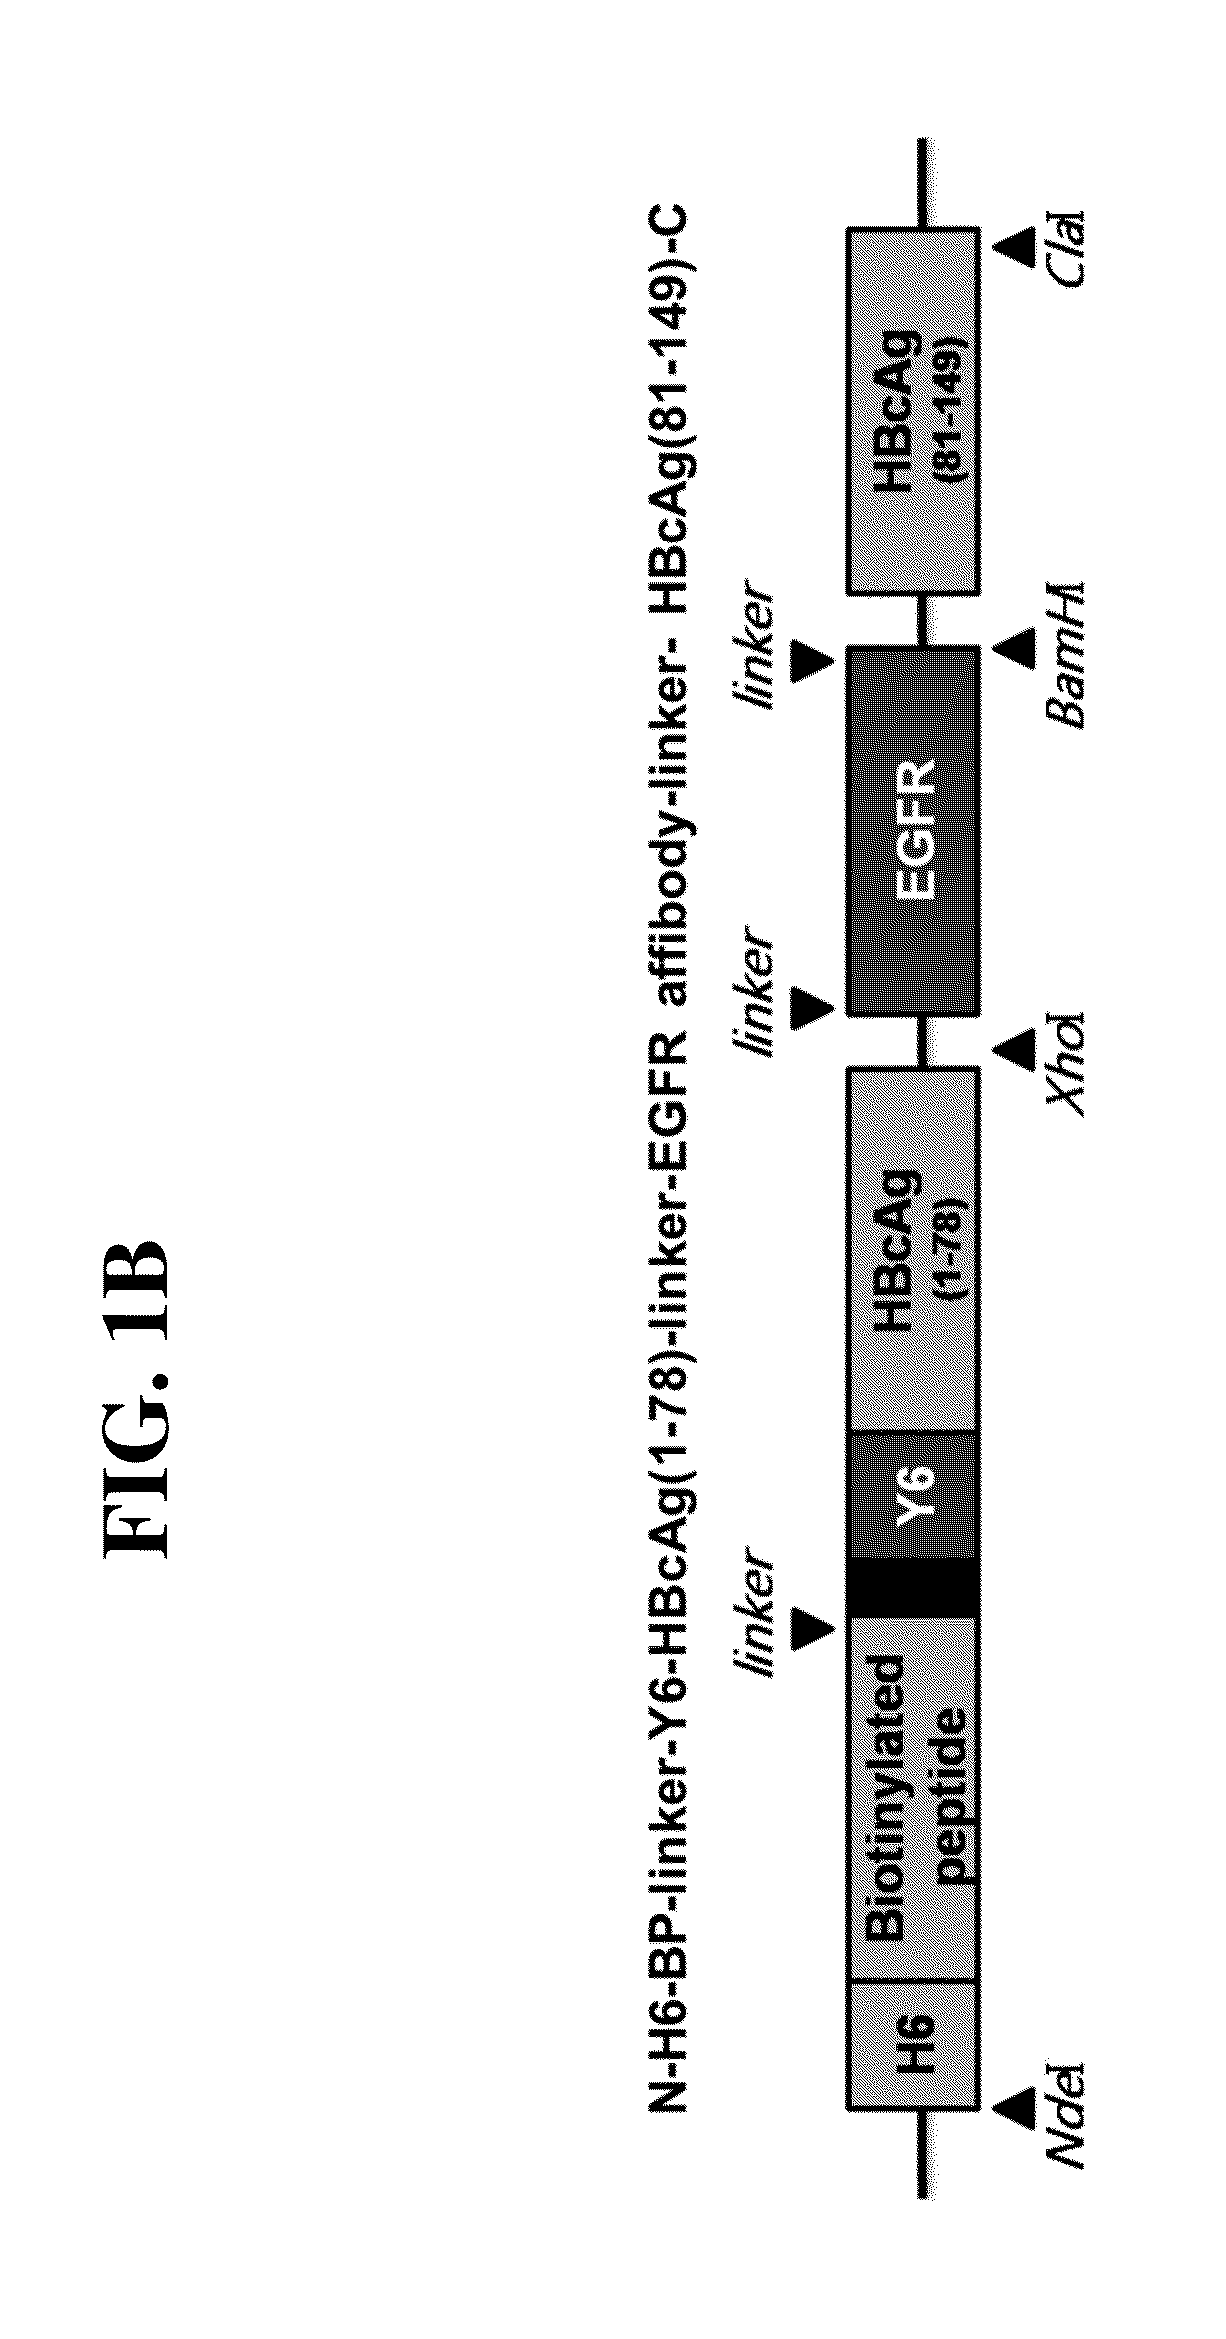 Recombinant self-assembling protein comprising target-oriented peptide and use thereof